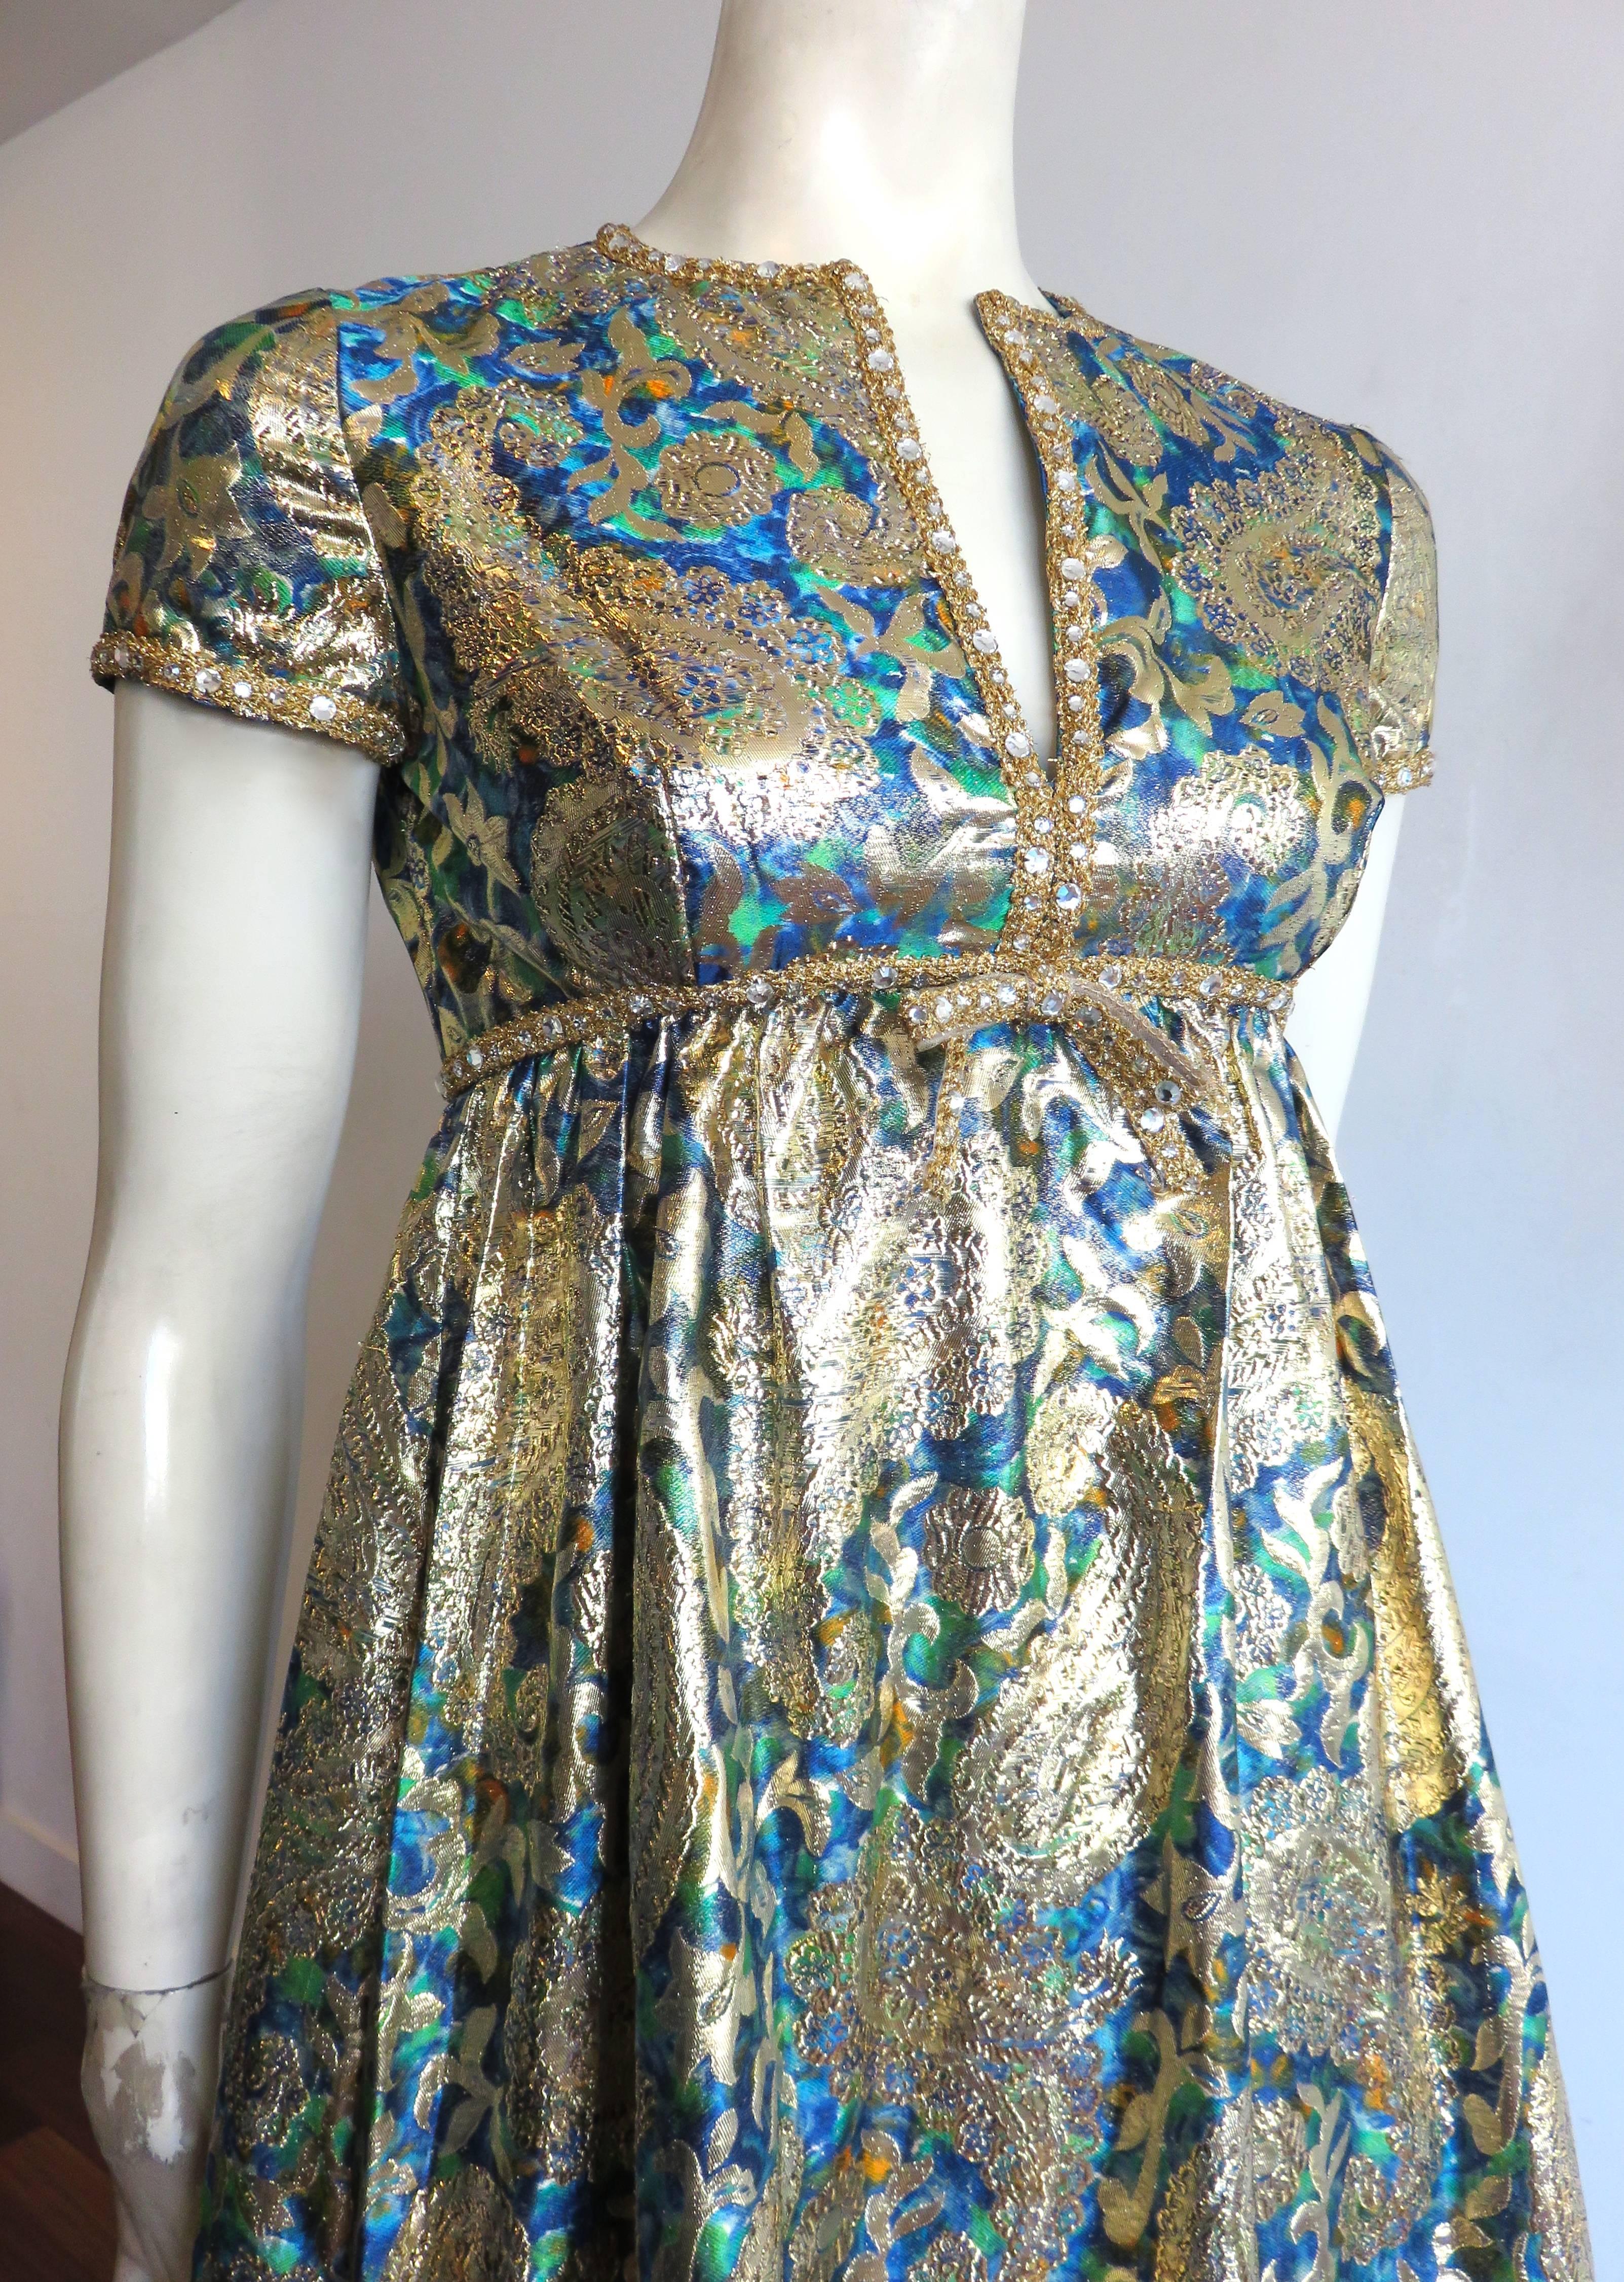 Pristine condition, late 1960's, Colinda by MALCOLM STARR, golden brocade evening gown.

This stunning evening gown is made of a opulent, bright, metallic-gold brocade featuring a gorgeous, paisley, and floral jacquard woven artwork.  The base of